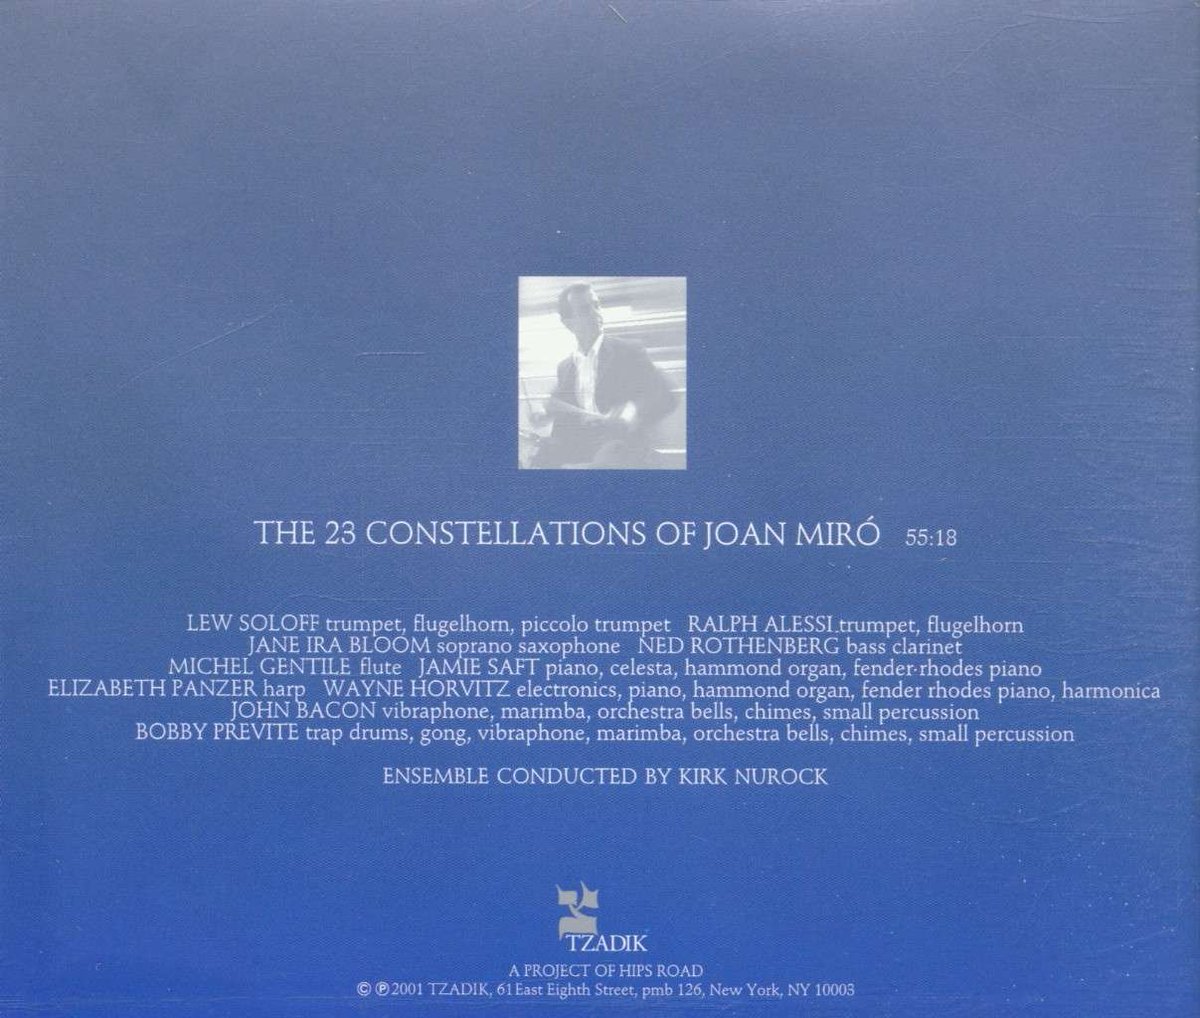 One of my favorite albums of all time is now on streaming. Go check it out!! @bobbyprevite 

Bobby Previte – The 23 Constellations Of Joan Miró (Tzadik, 2002) 

Jazz / Contemporary Chamber / Percussion